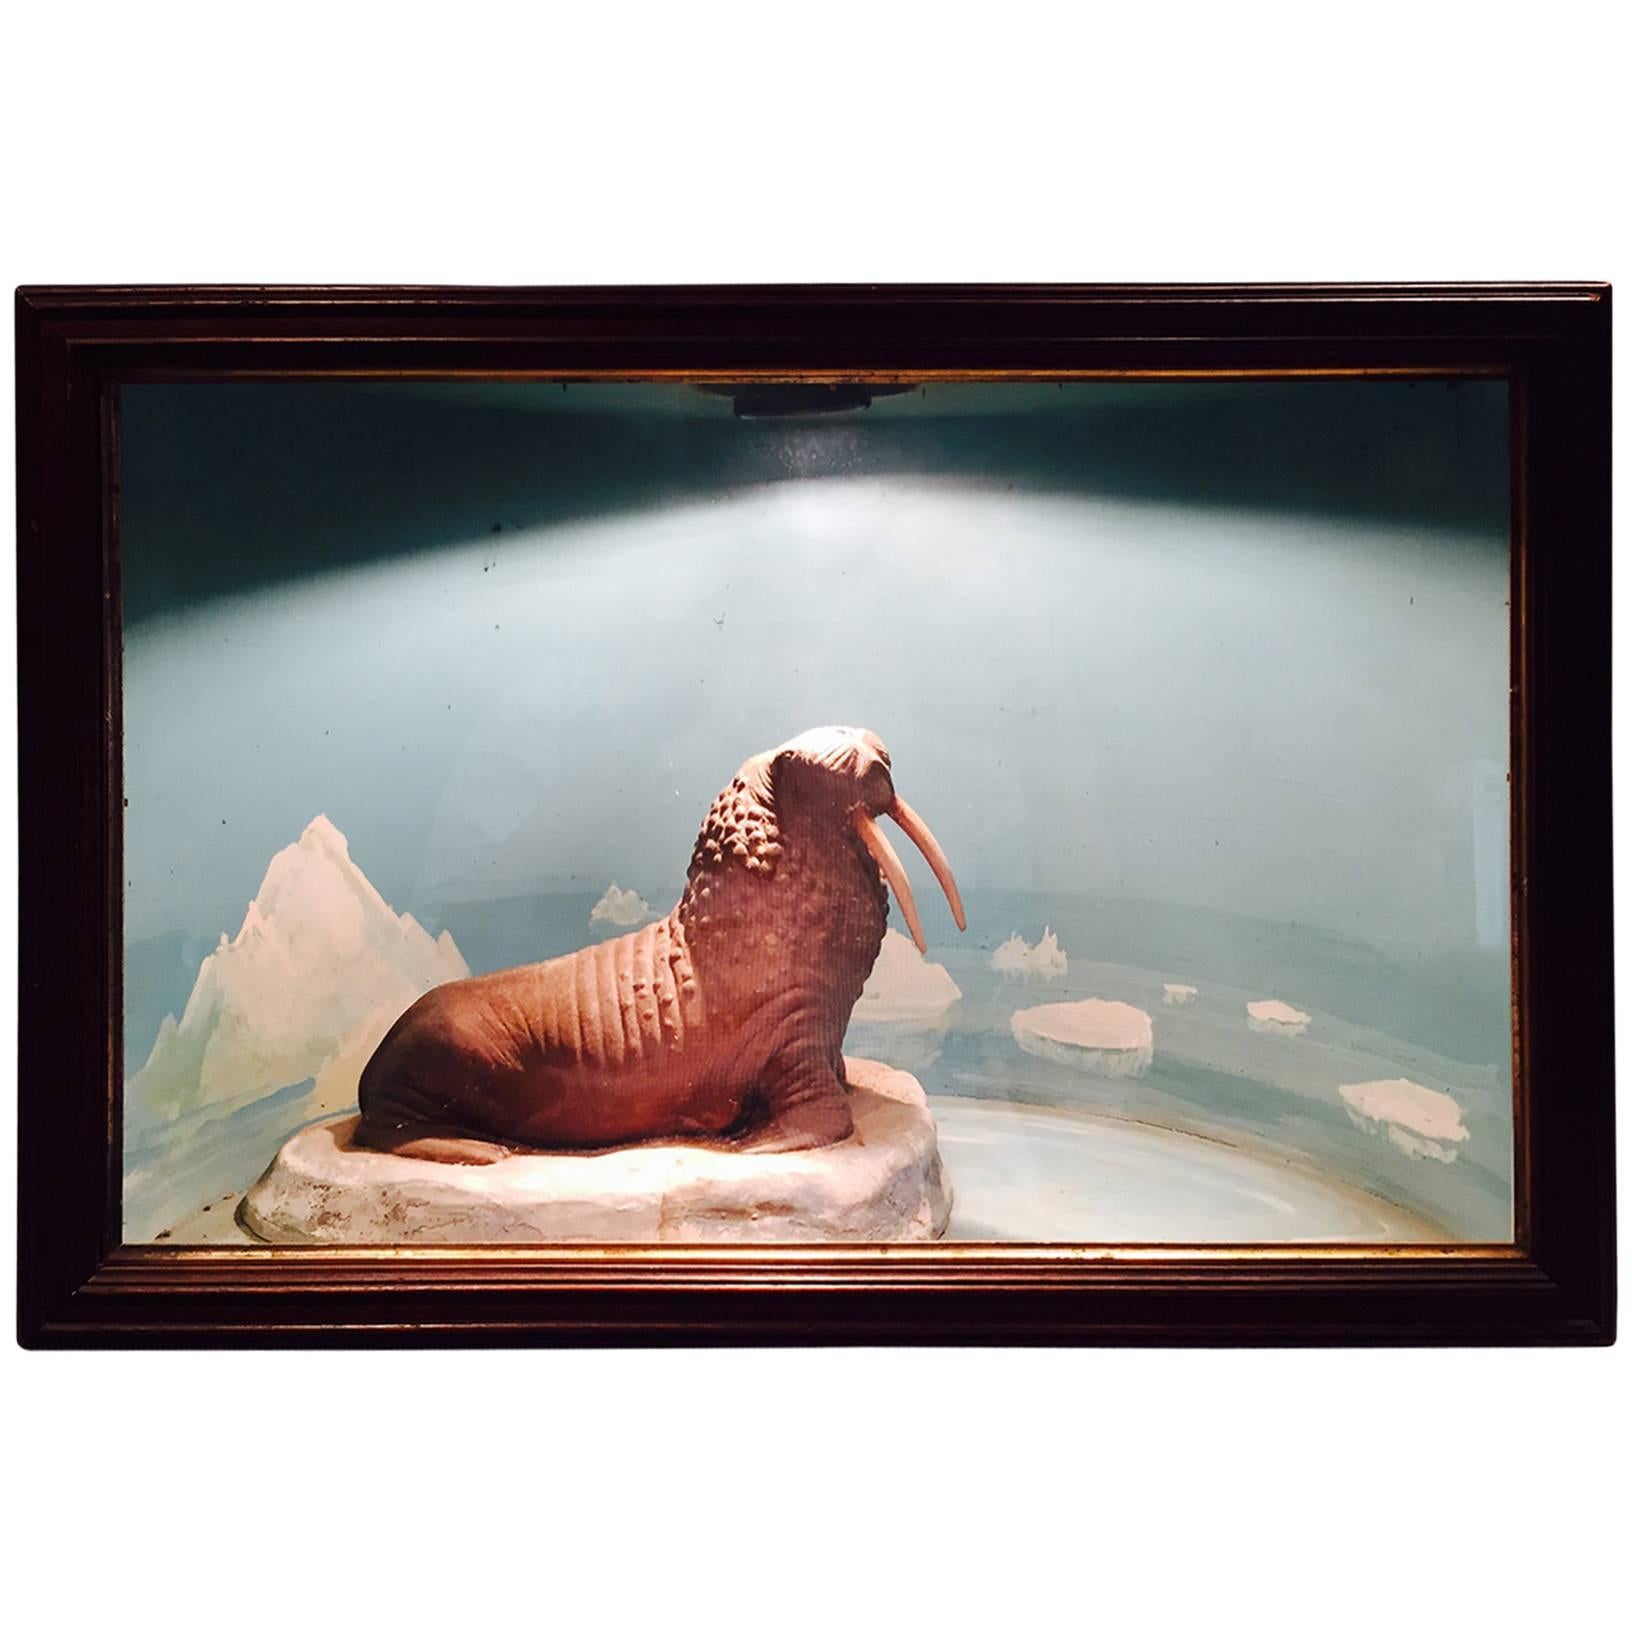 Vintage Walrus Diorama, De-Accessioned from a West Hartford Museum